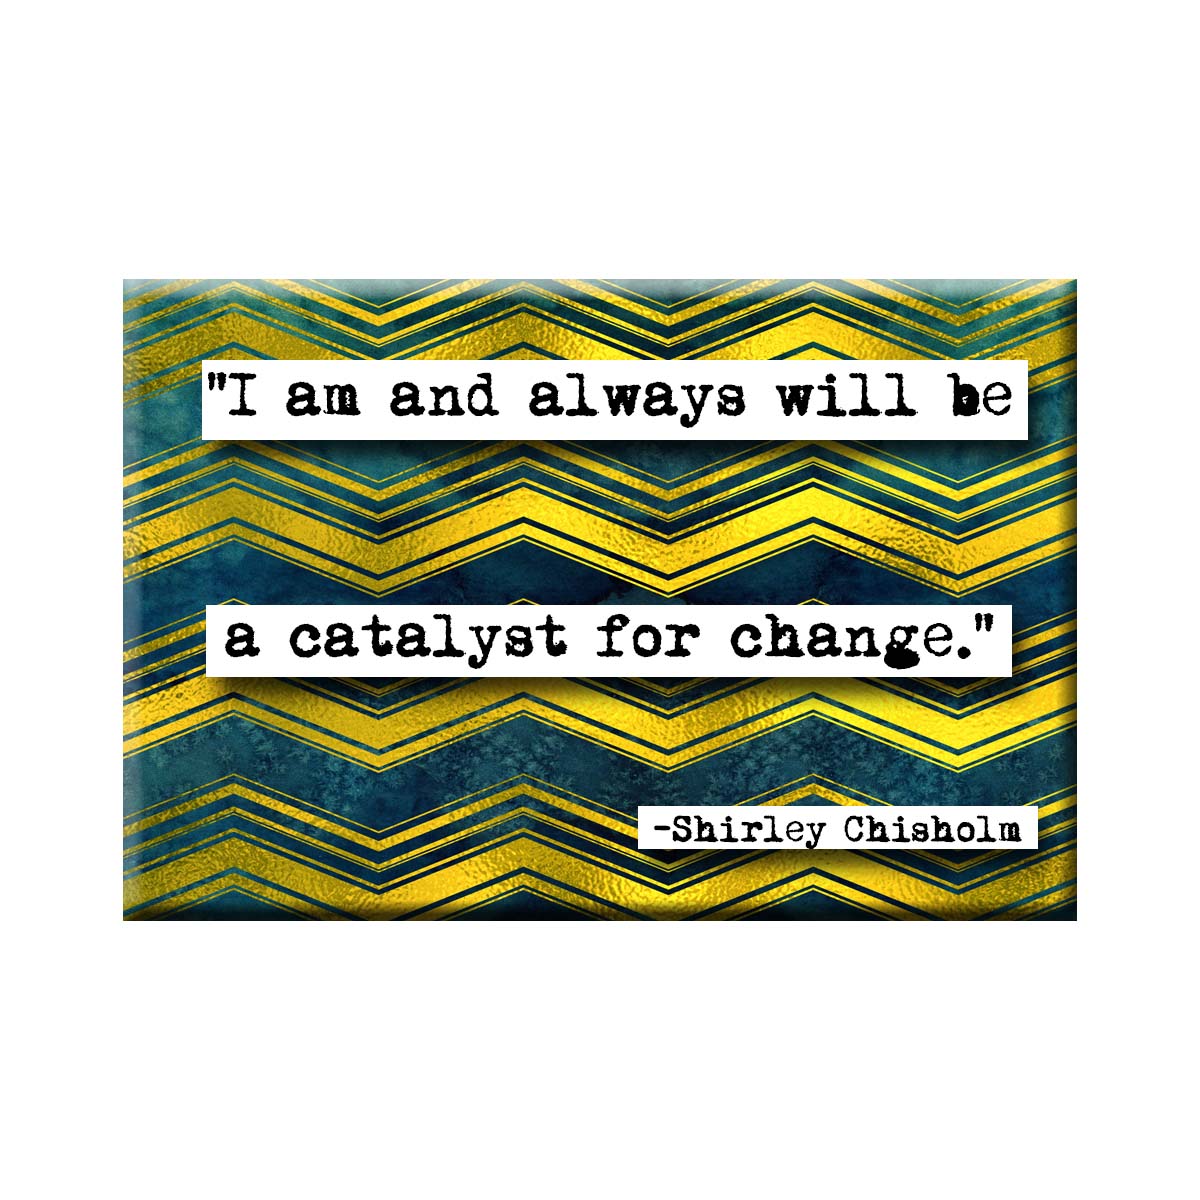 Shirley Chisholm Catalyst For Change Quote Refrigerator Magnet (RM694)